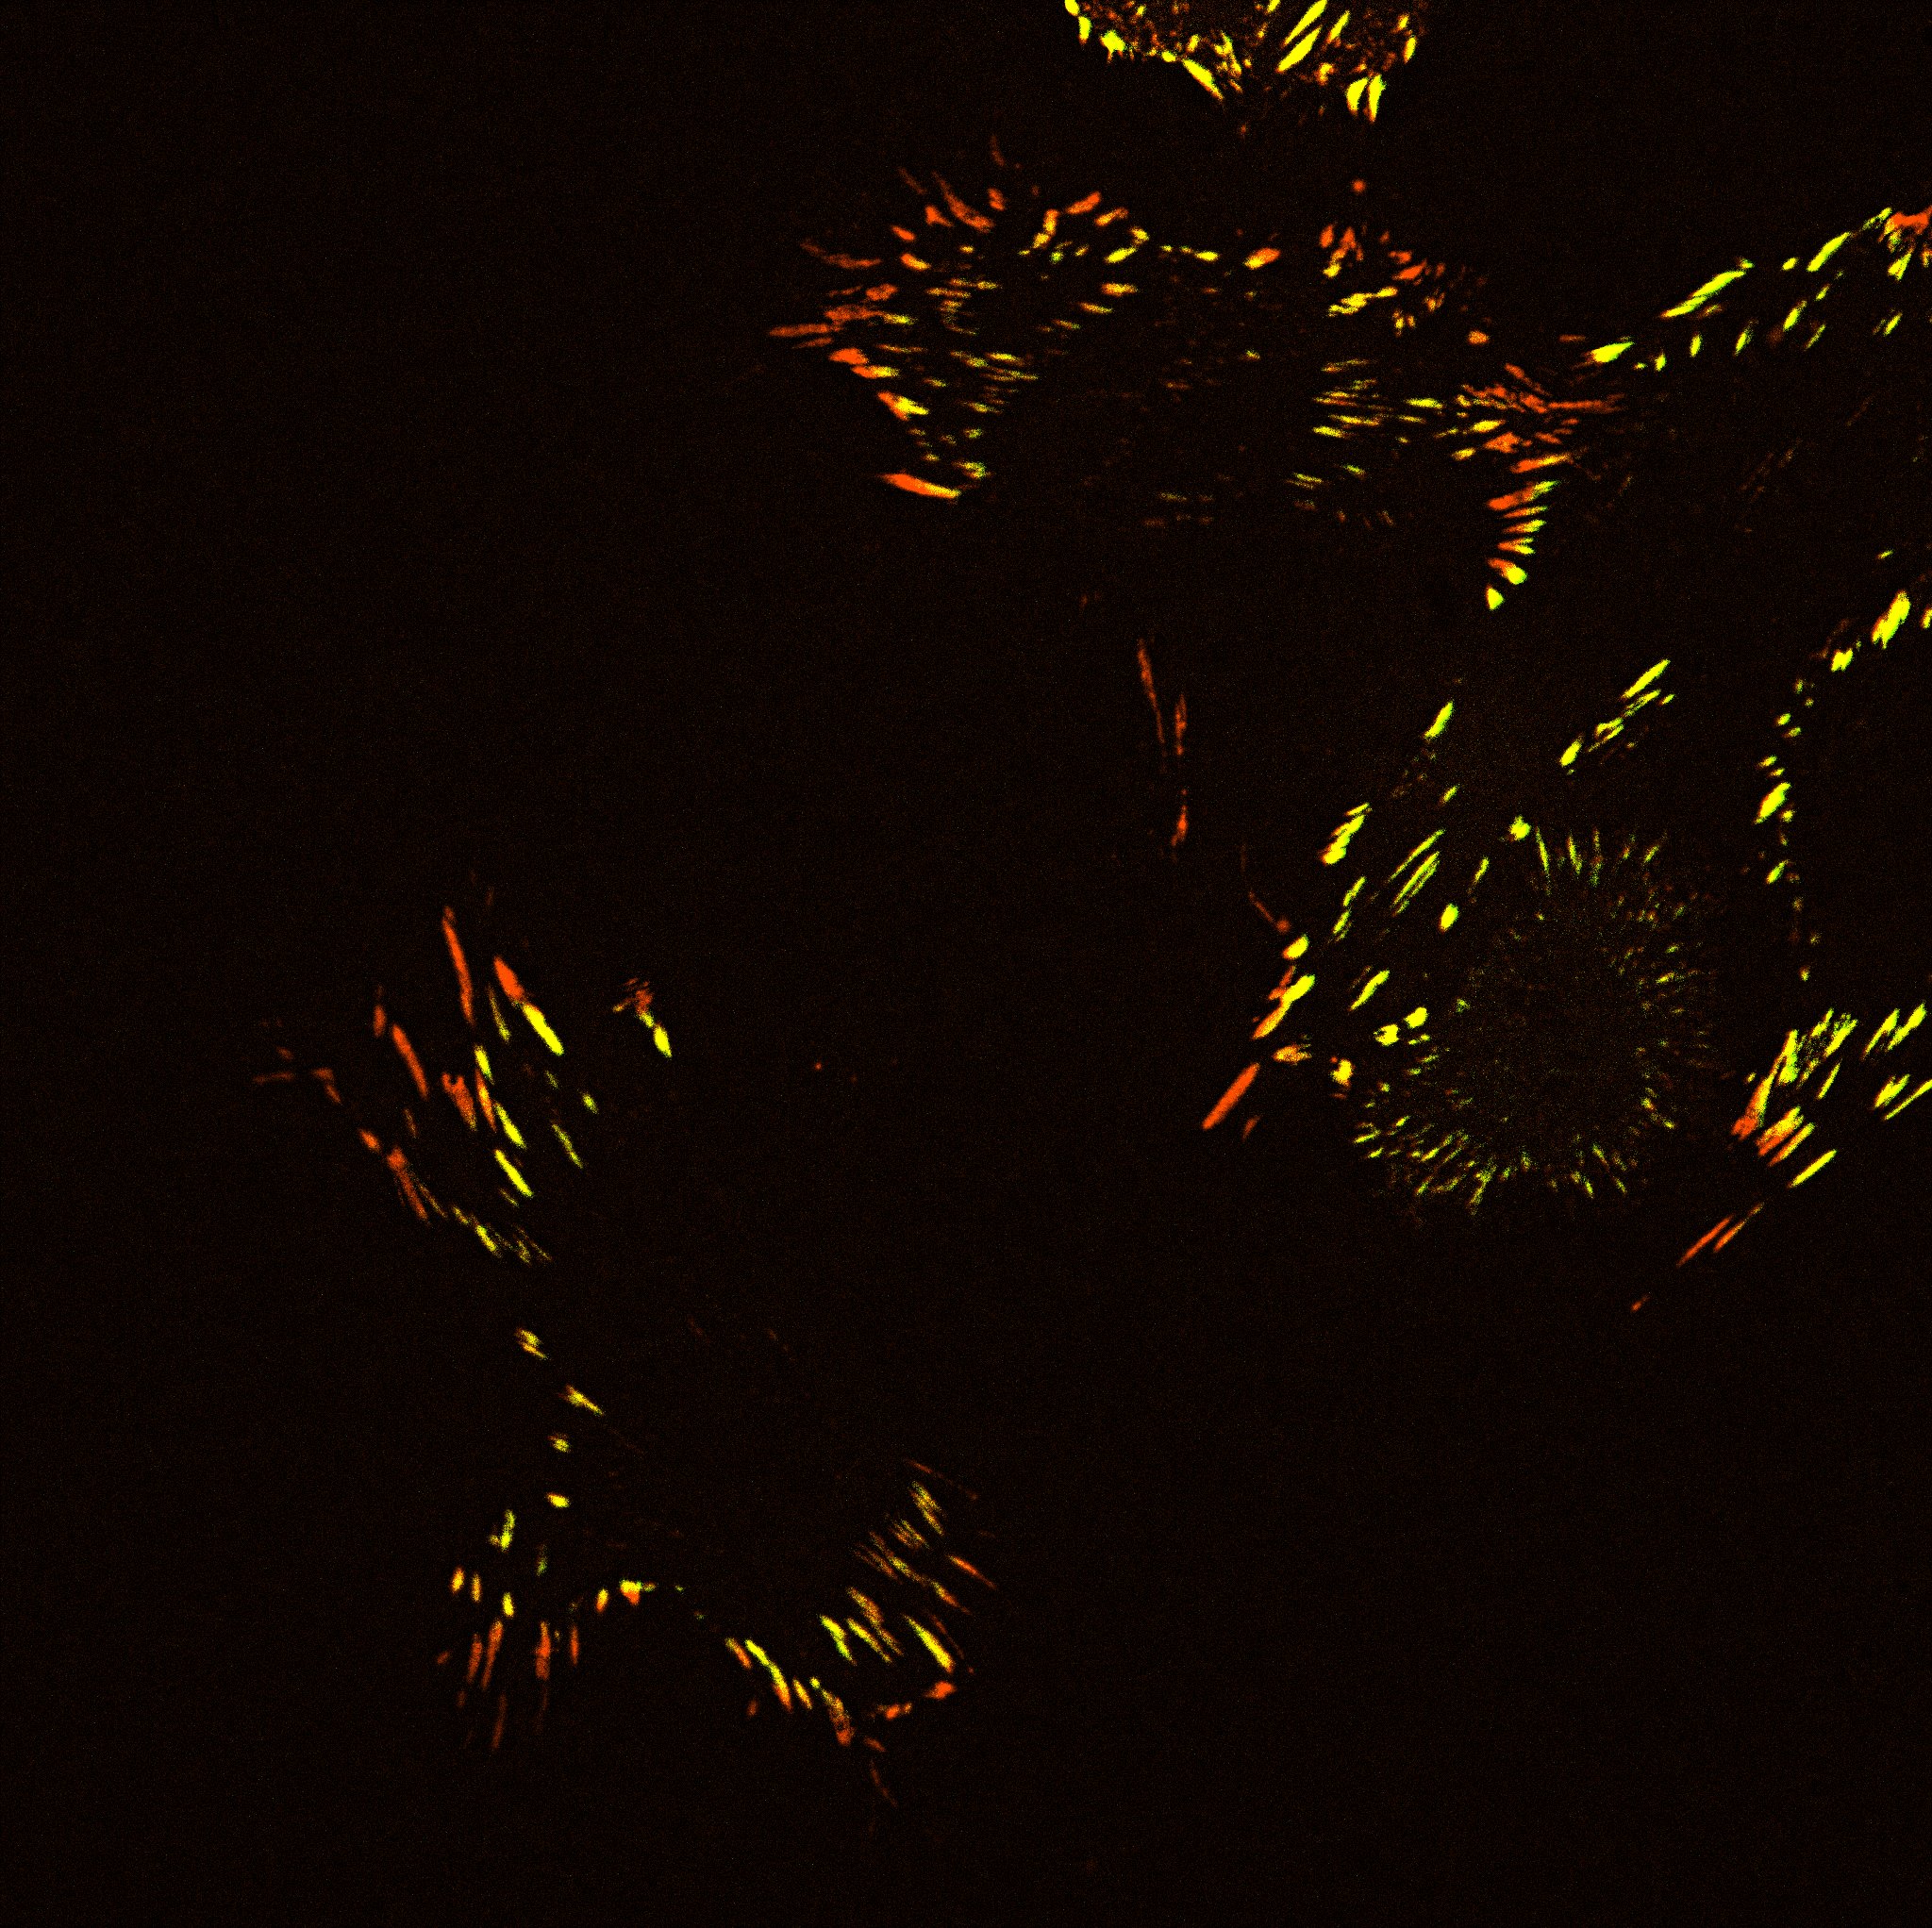 Focal adhesions of mouse embryonic fibroblasts after contact with the extracellular adherence protein (EAP) of the bacteria Staphylococcus aureus. Photo courtesy of Raphael Maser.